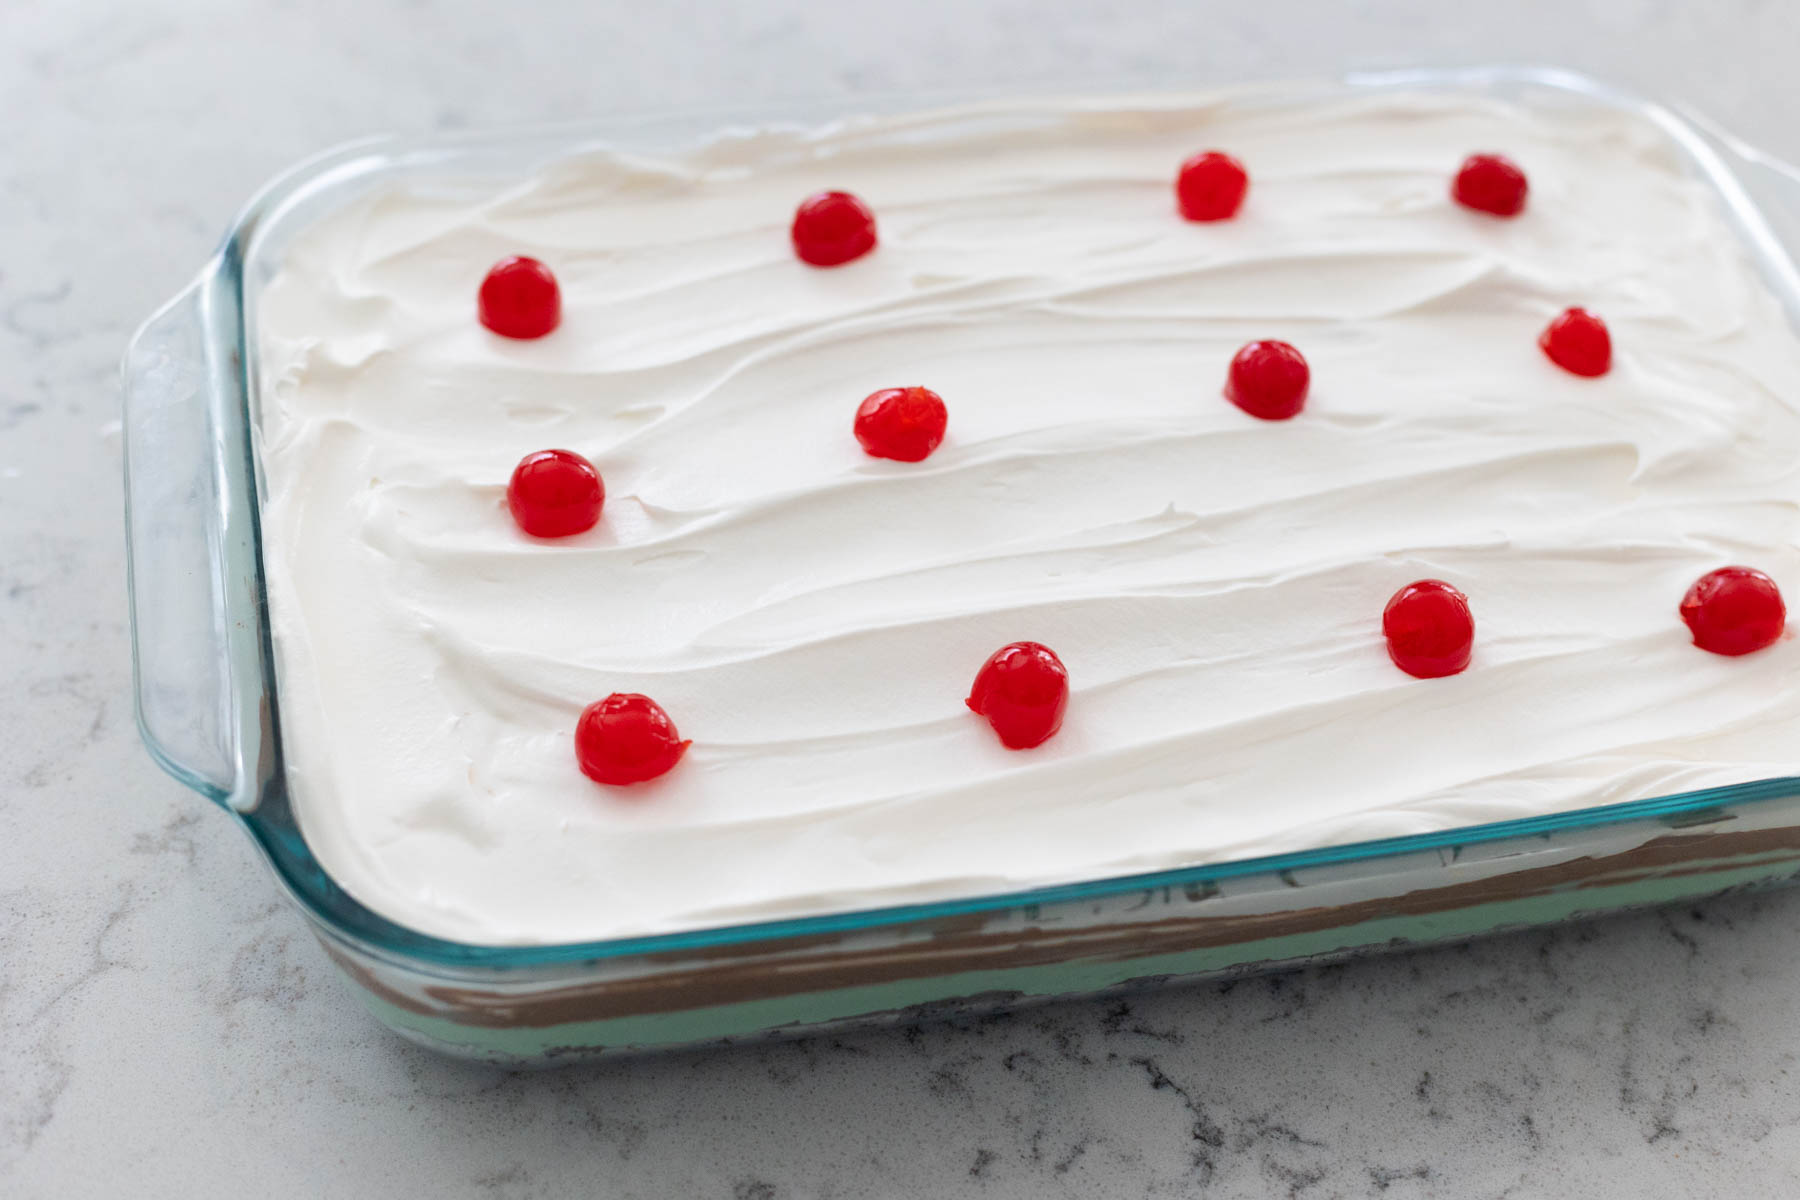 The finished torte has whipped topping frosting and maraschino cherries dotted over the top.